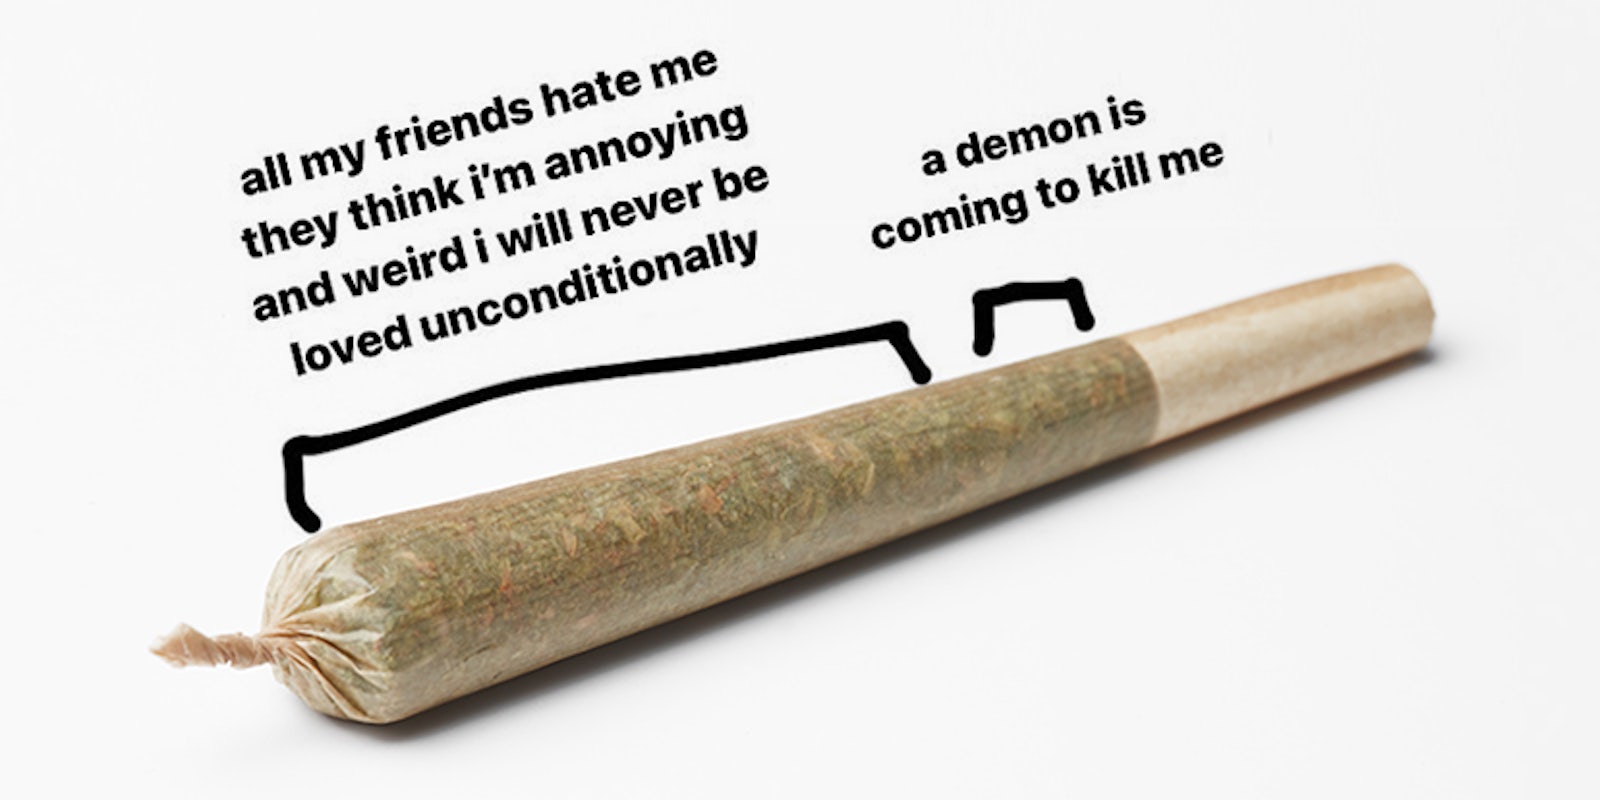 joint with sections labeled 'all my friends hate me they think i'm annoying and weird i will never be loved unconditionally' and 'a demon is coming to kill me'